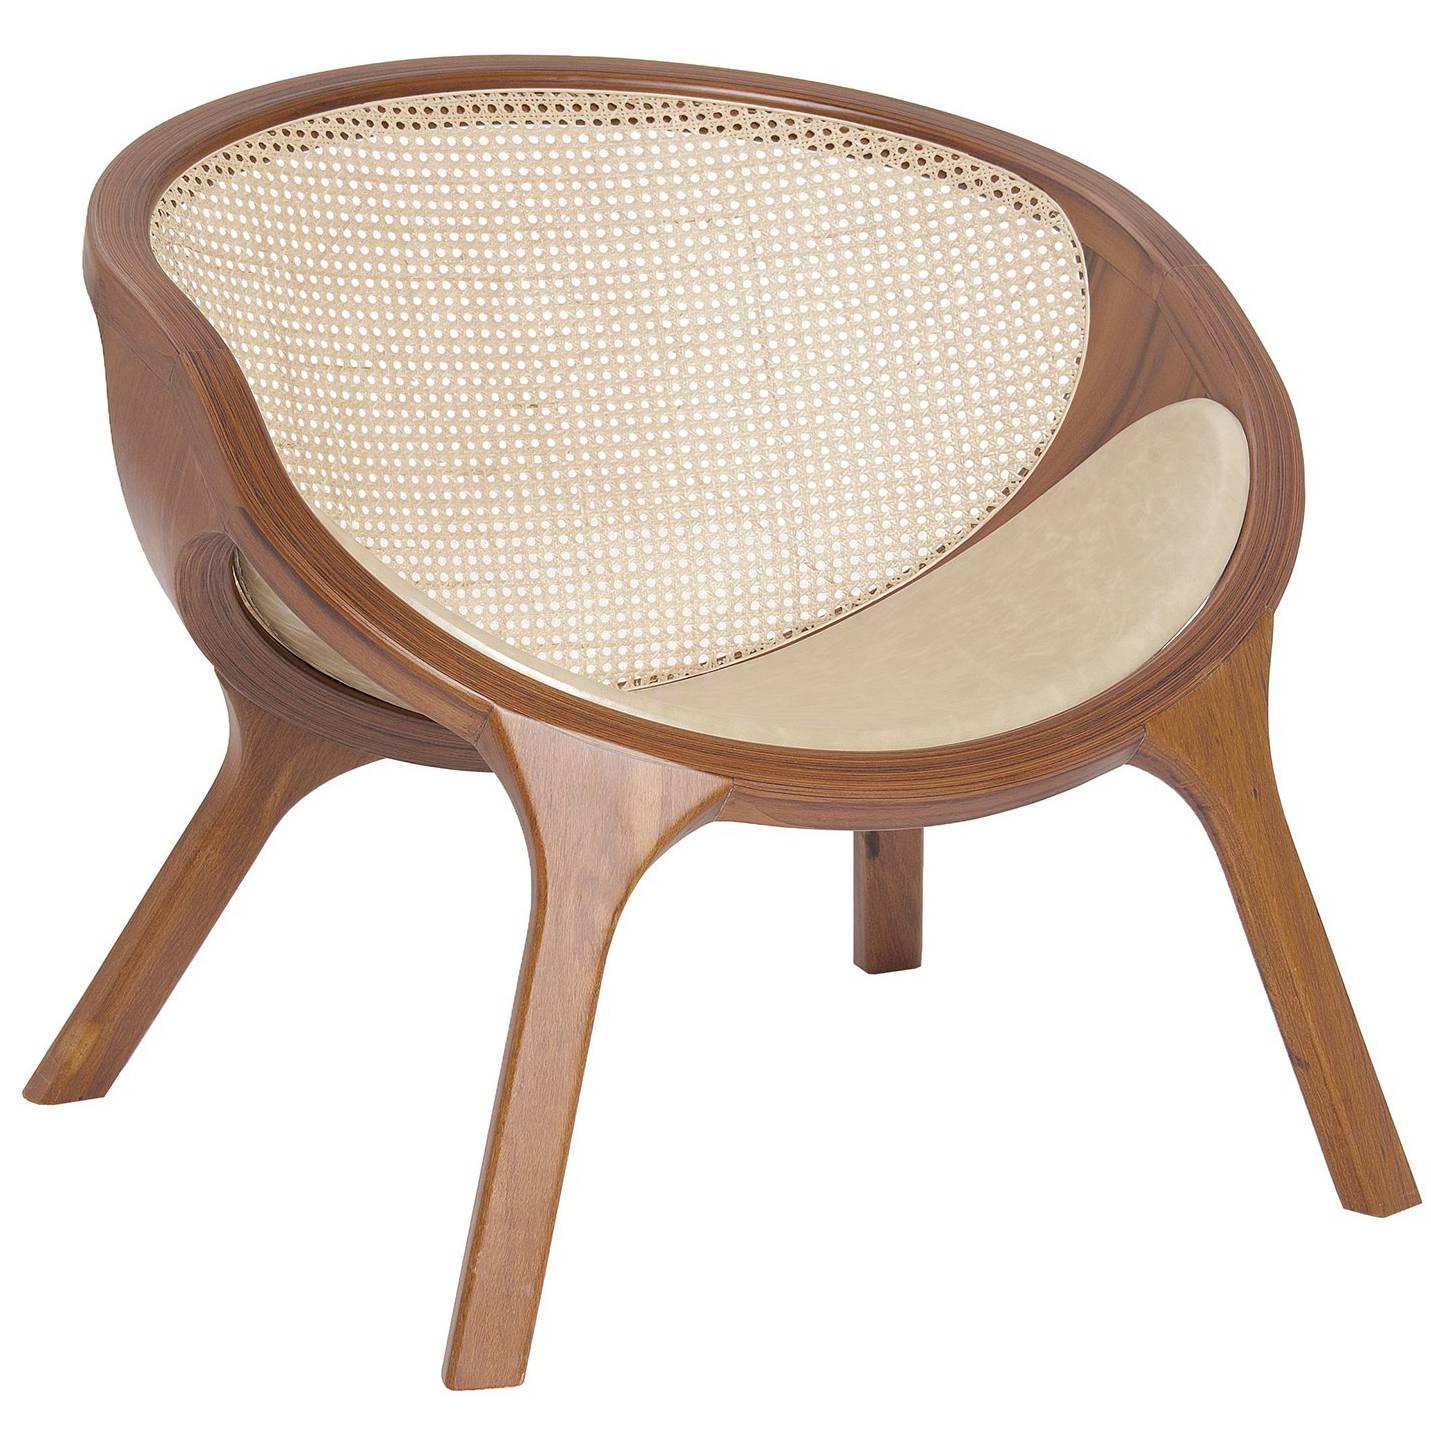 E2 Brazilian Contemporary Wood, Leather and Straw Easychair by Lattoog